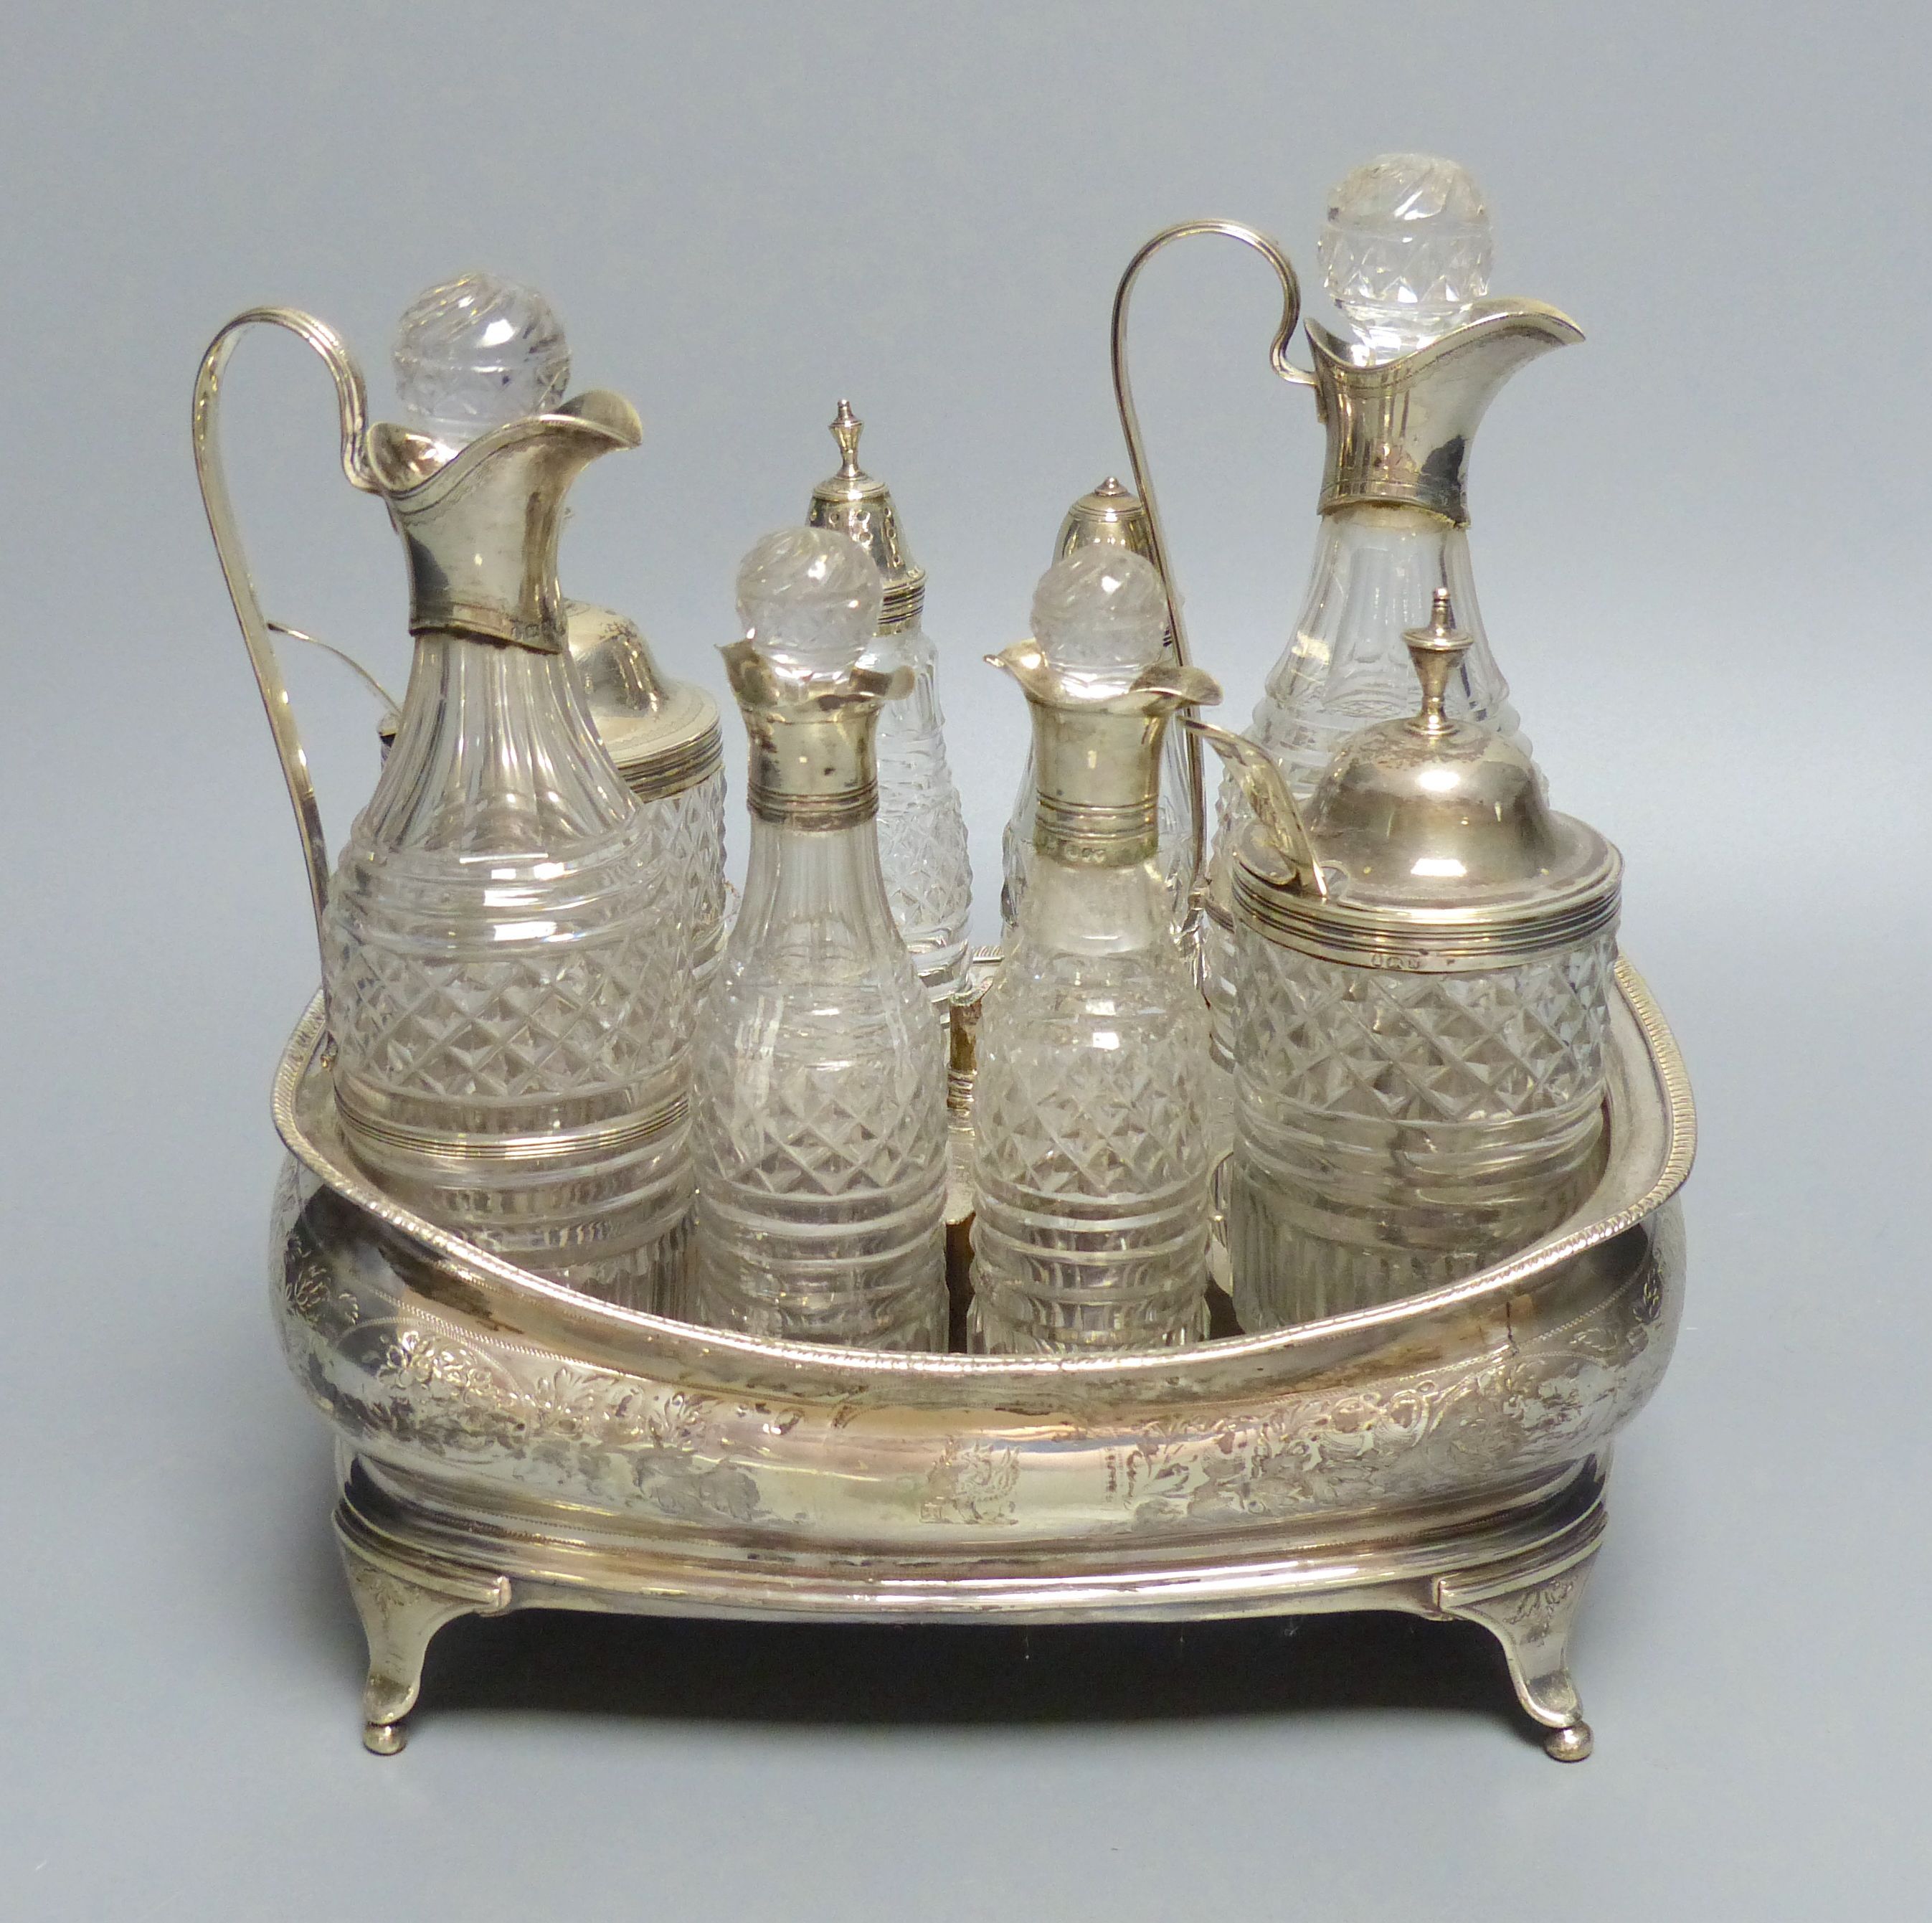 A George III silver cruet stand, with six matching cruets, London 1808, and two associated cruets, handle missing,